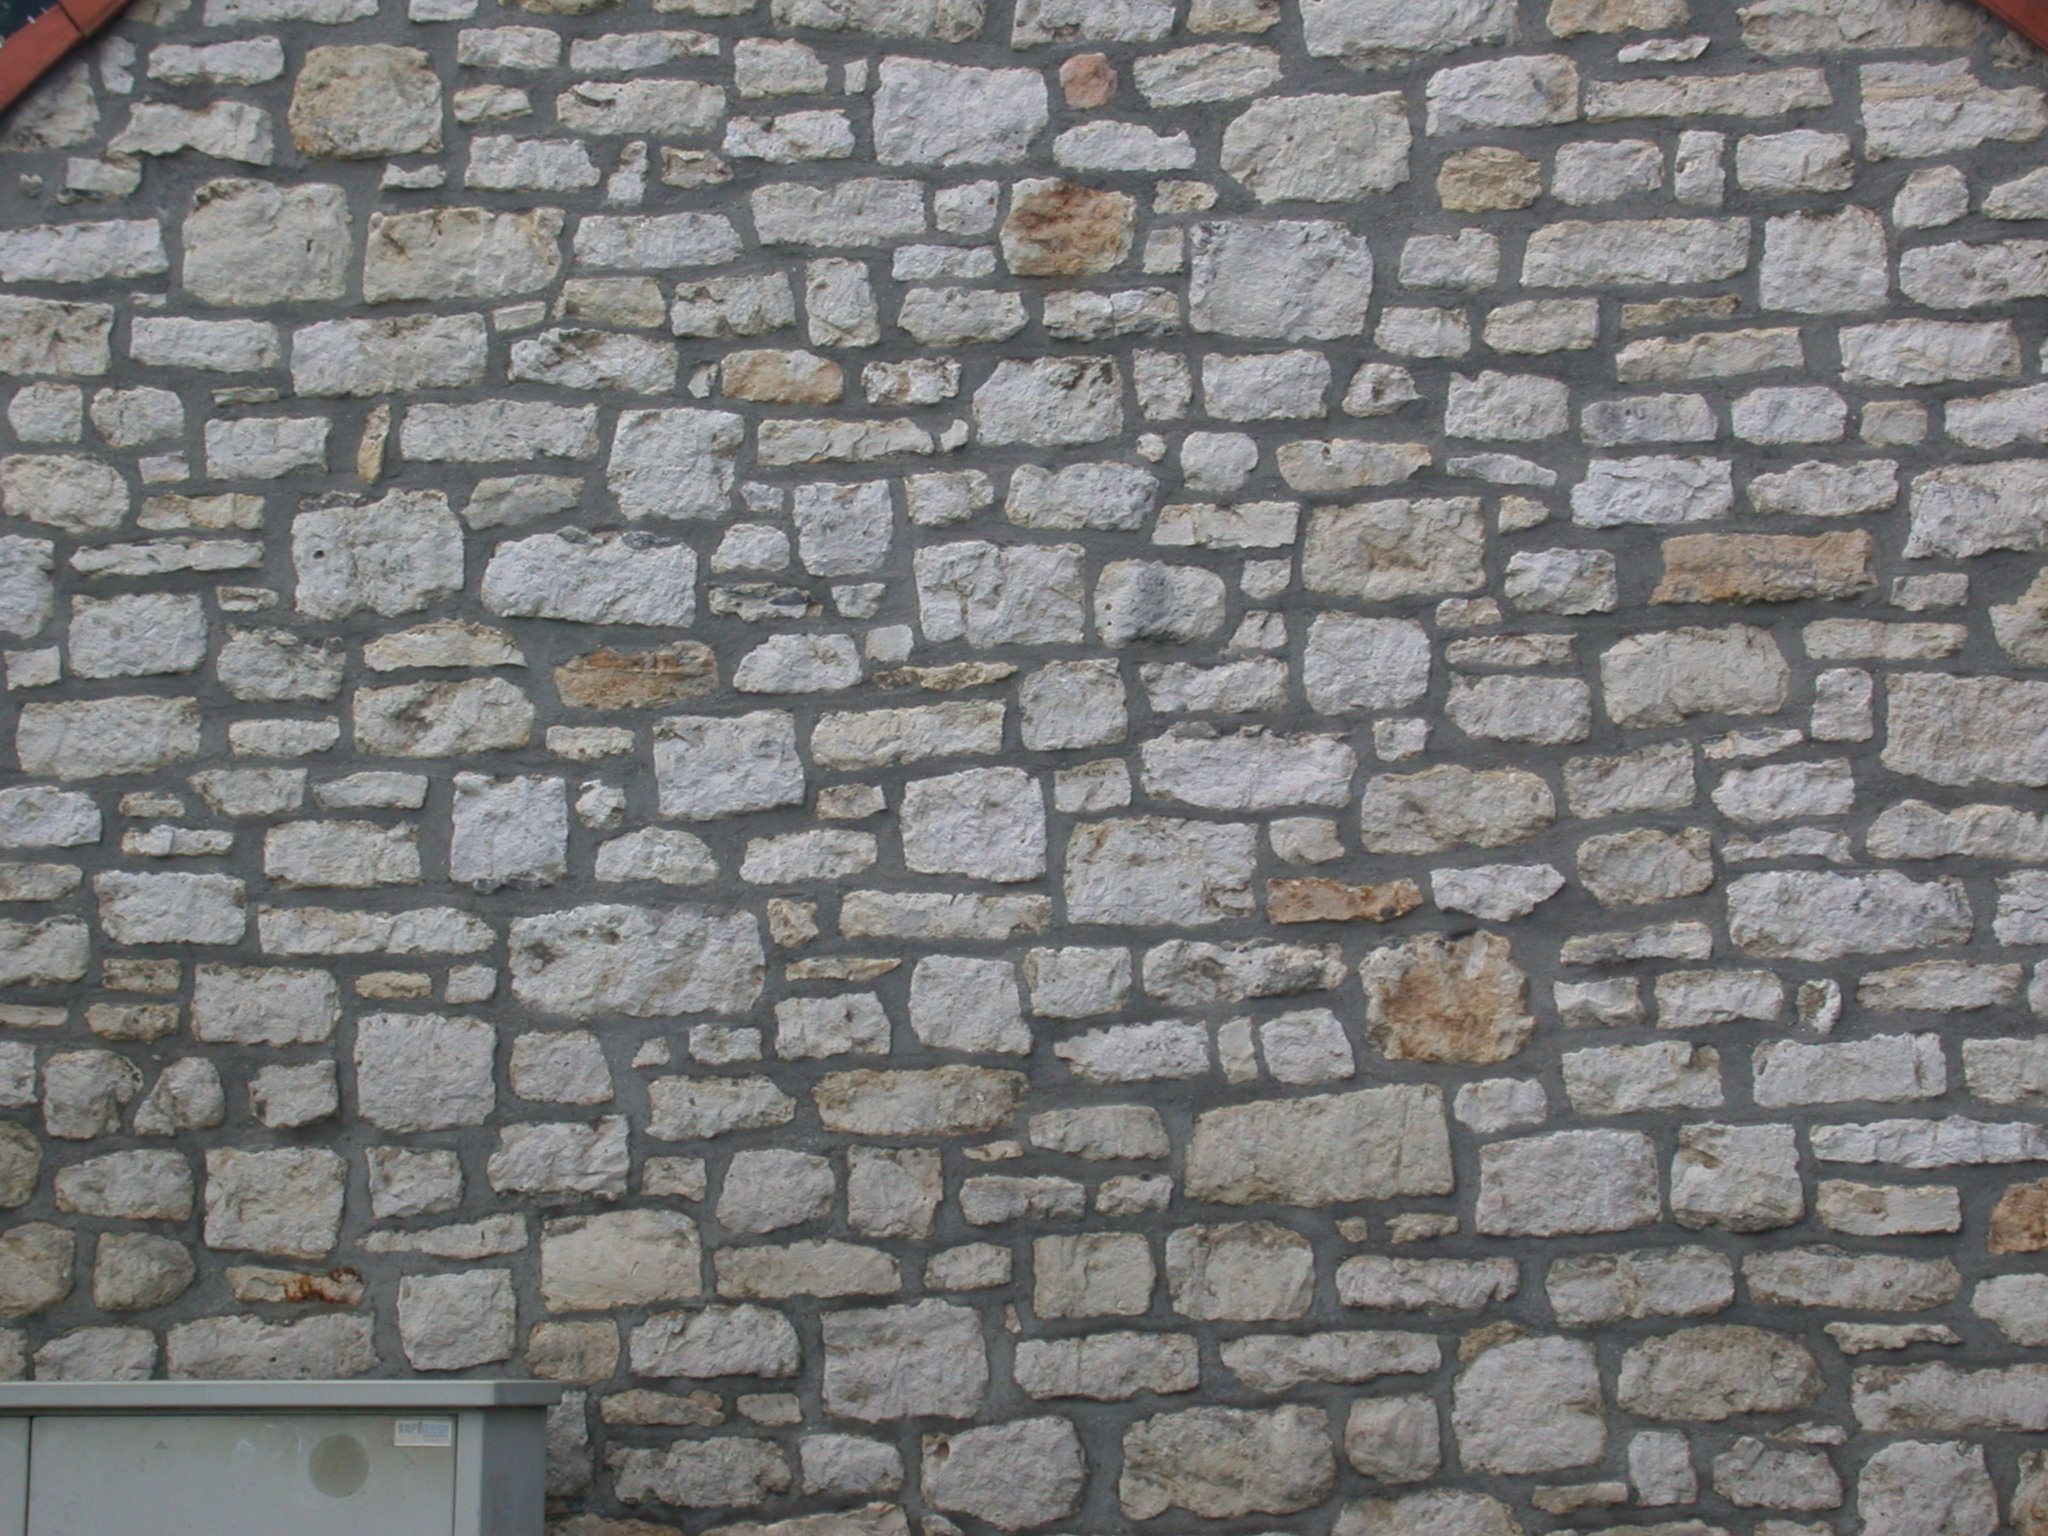 Wall texture | castle | Pinterest | Wall textures, Castles and Walls